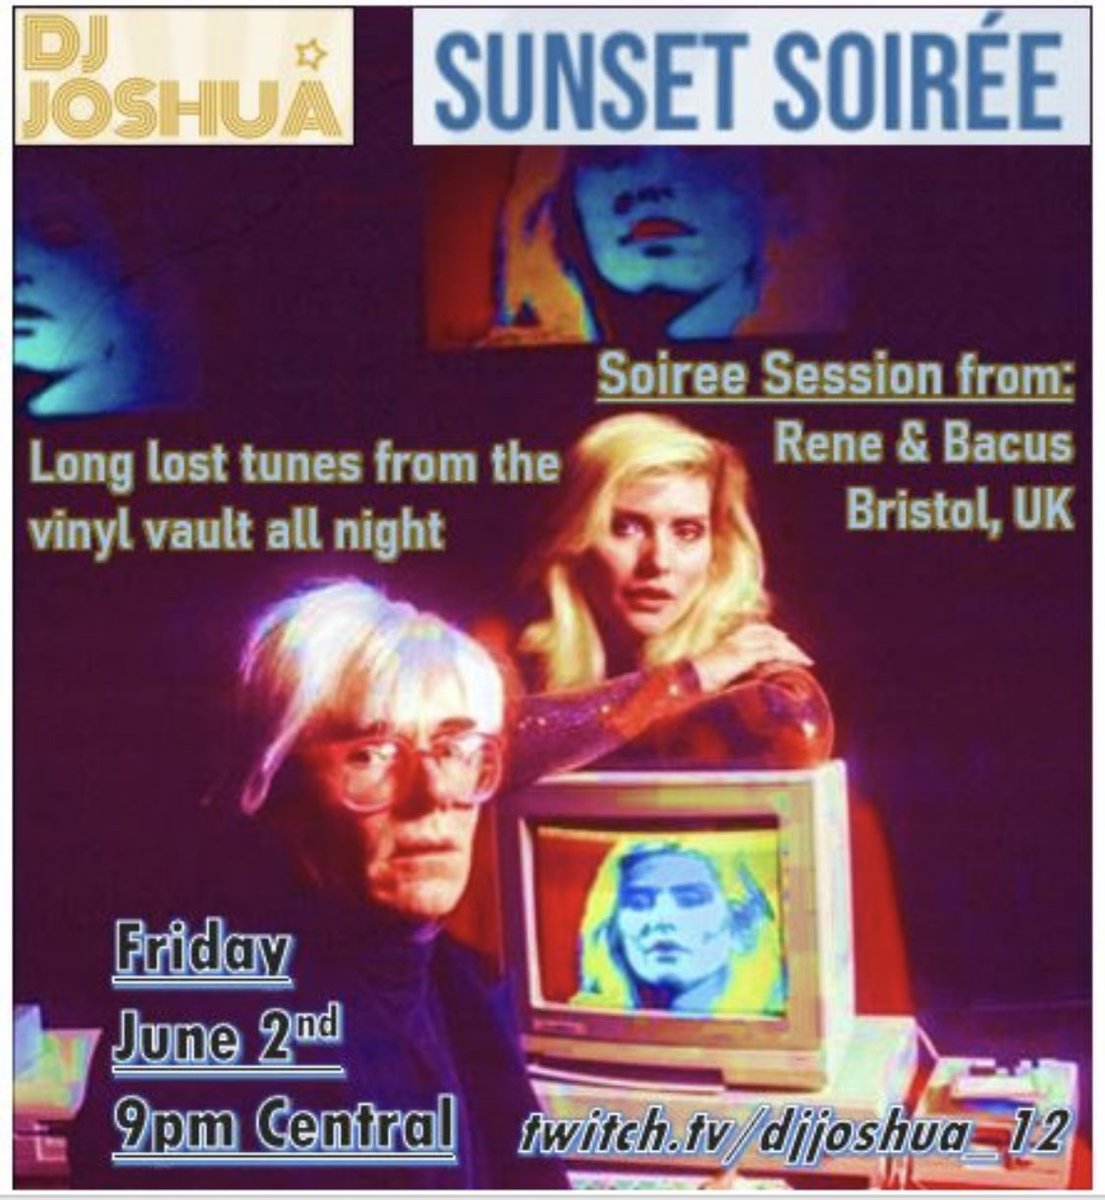 #SunsetSoiree live Friday Night! Special Soiree Session from Rene & Bacus straight outta Bristol, UK. Plus…buried deep house treasures from the #vinylvault all night. Follow at Twitch.tv/djjoshua_12 housemusic #housemusiclovers #disco #deephouse #garageclassics #afrohouse